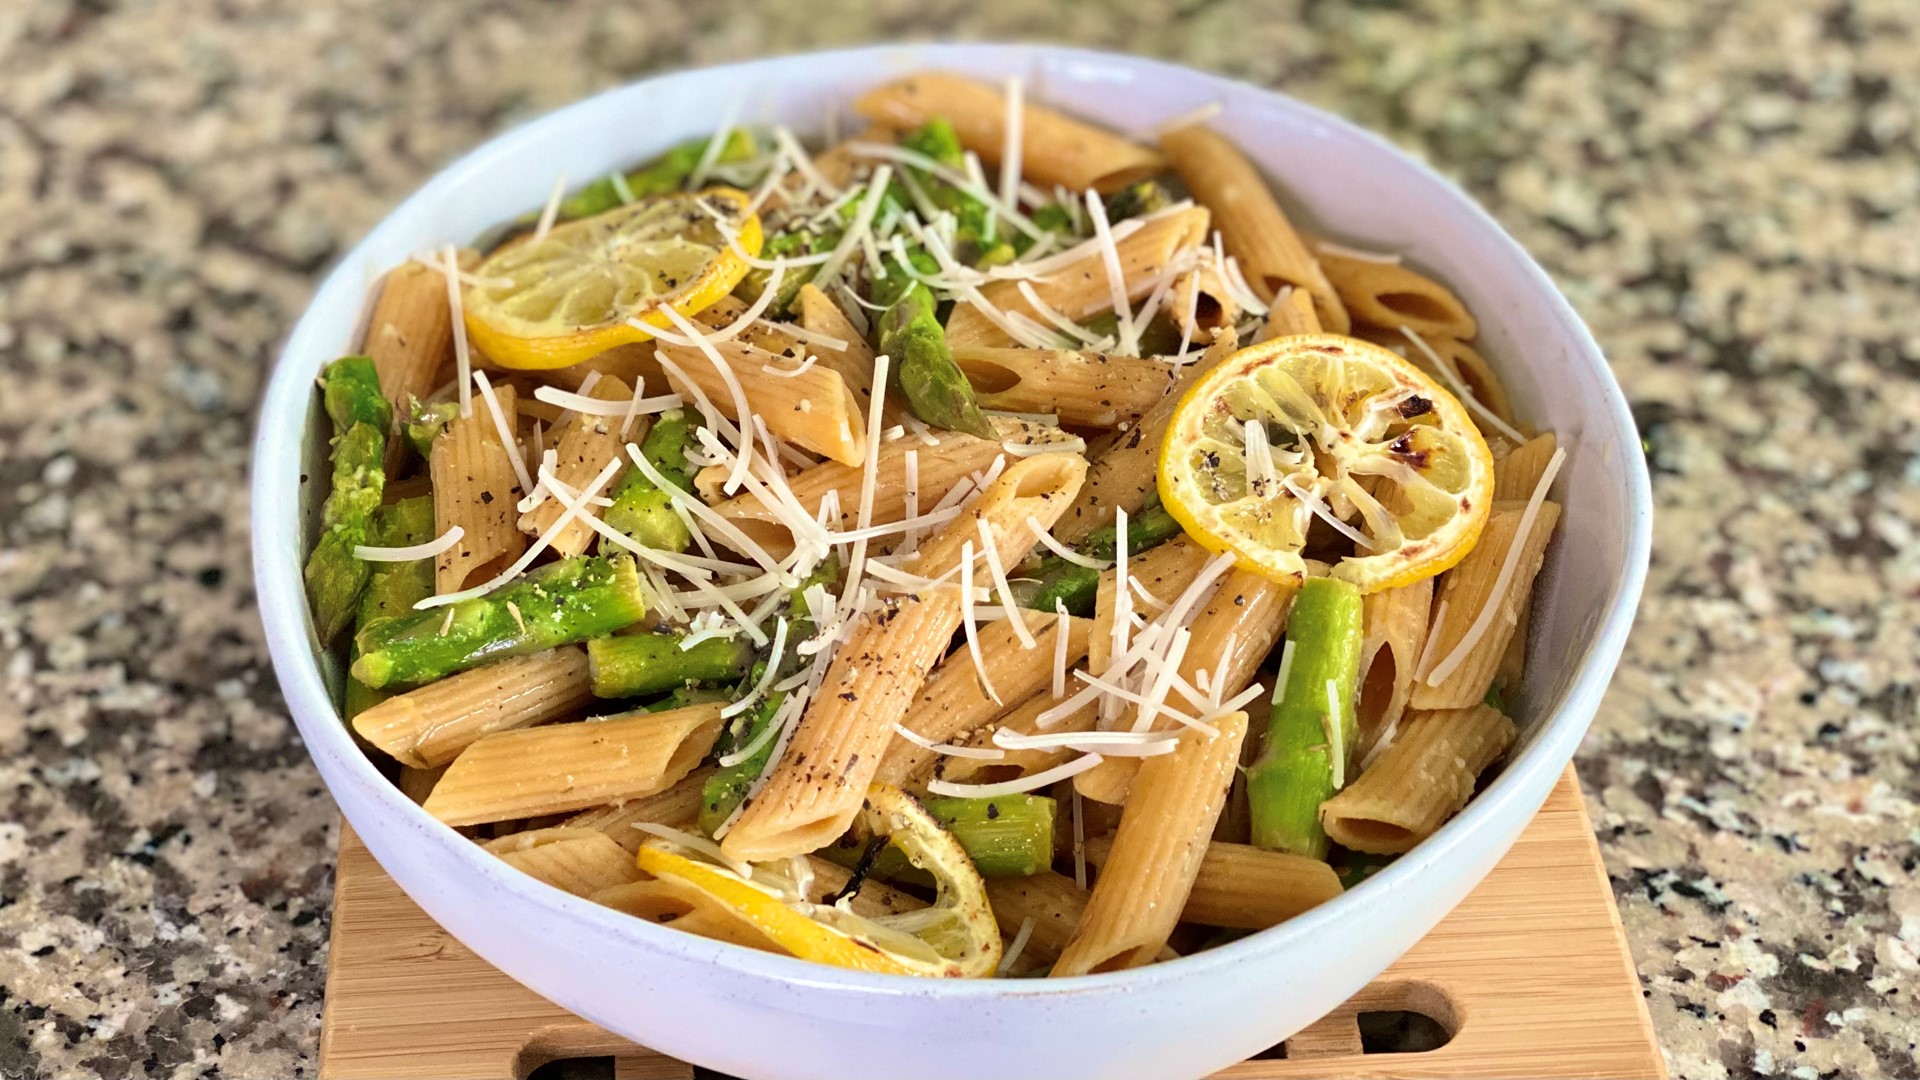 It's officially spring and that means it's time for the light and springy dishes to come back into our diets. This lemon and thyme asparagus pasta is perfect for it!